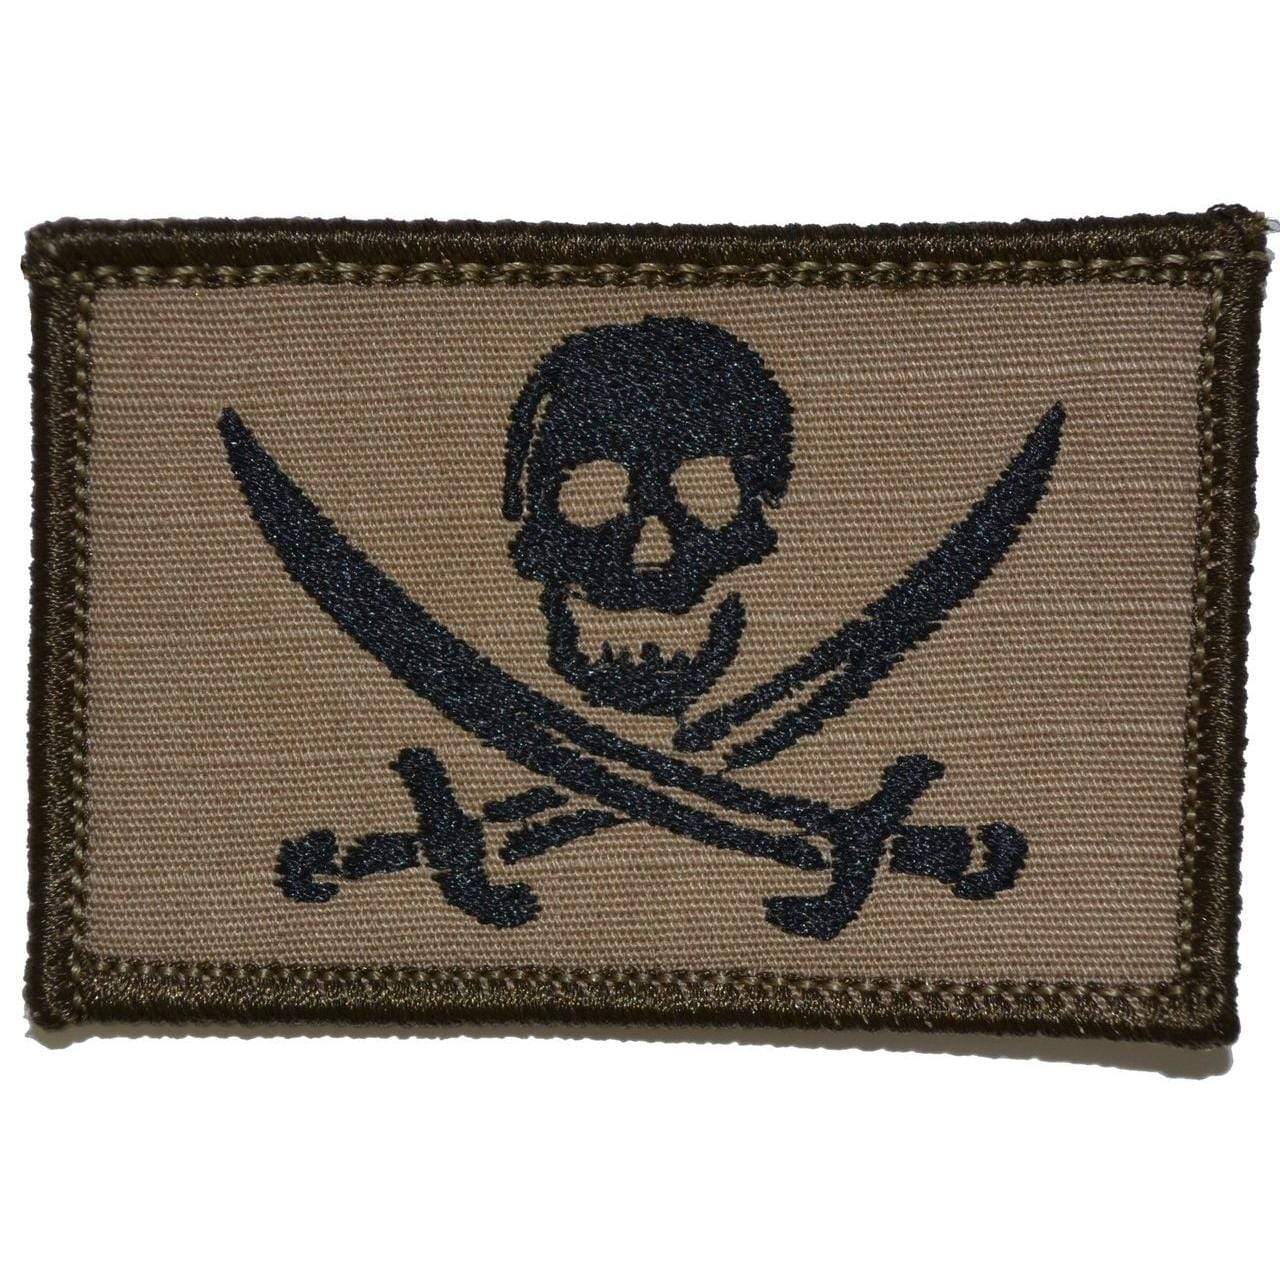 Tactical Gear Junkie Patches Coyote Brown w/ Black Pirate Jolly Roger - 2x3 Patch